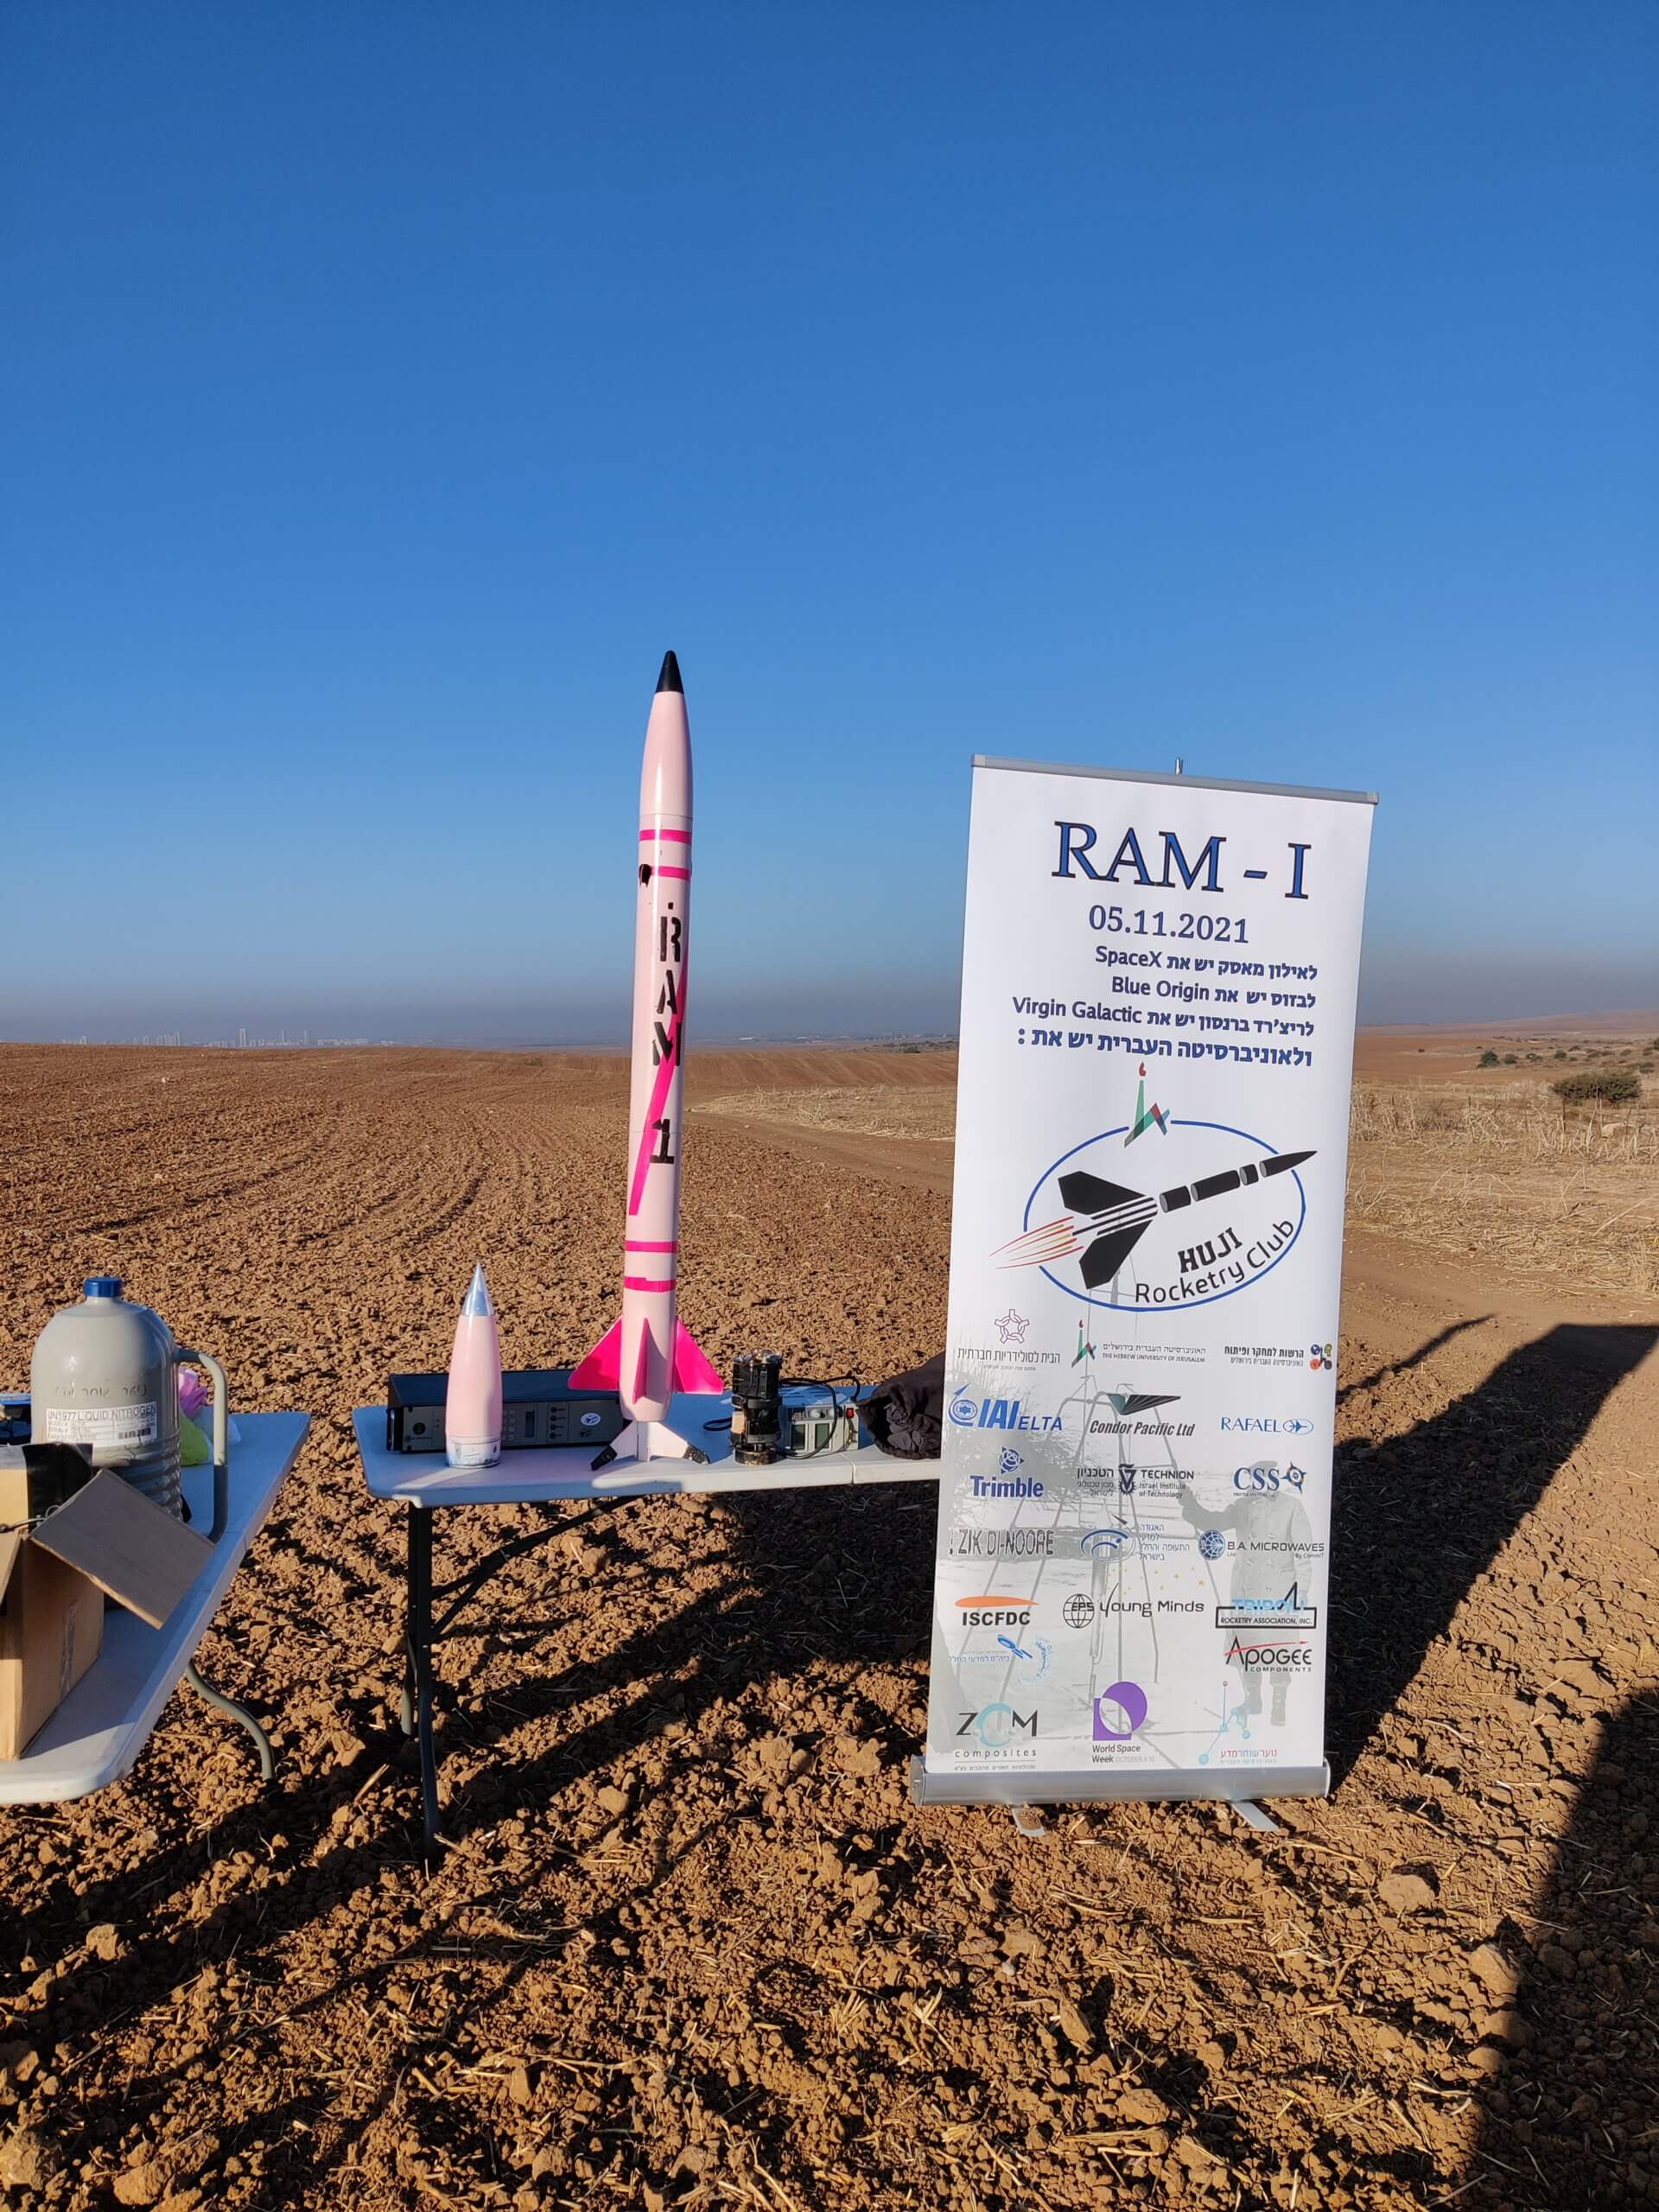 Just before the launch of the RAM-1 student rocket, on 5/11/2021. Photo courtesy of Talmud Raphael